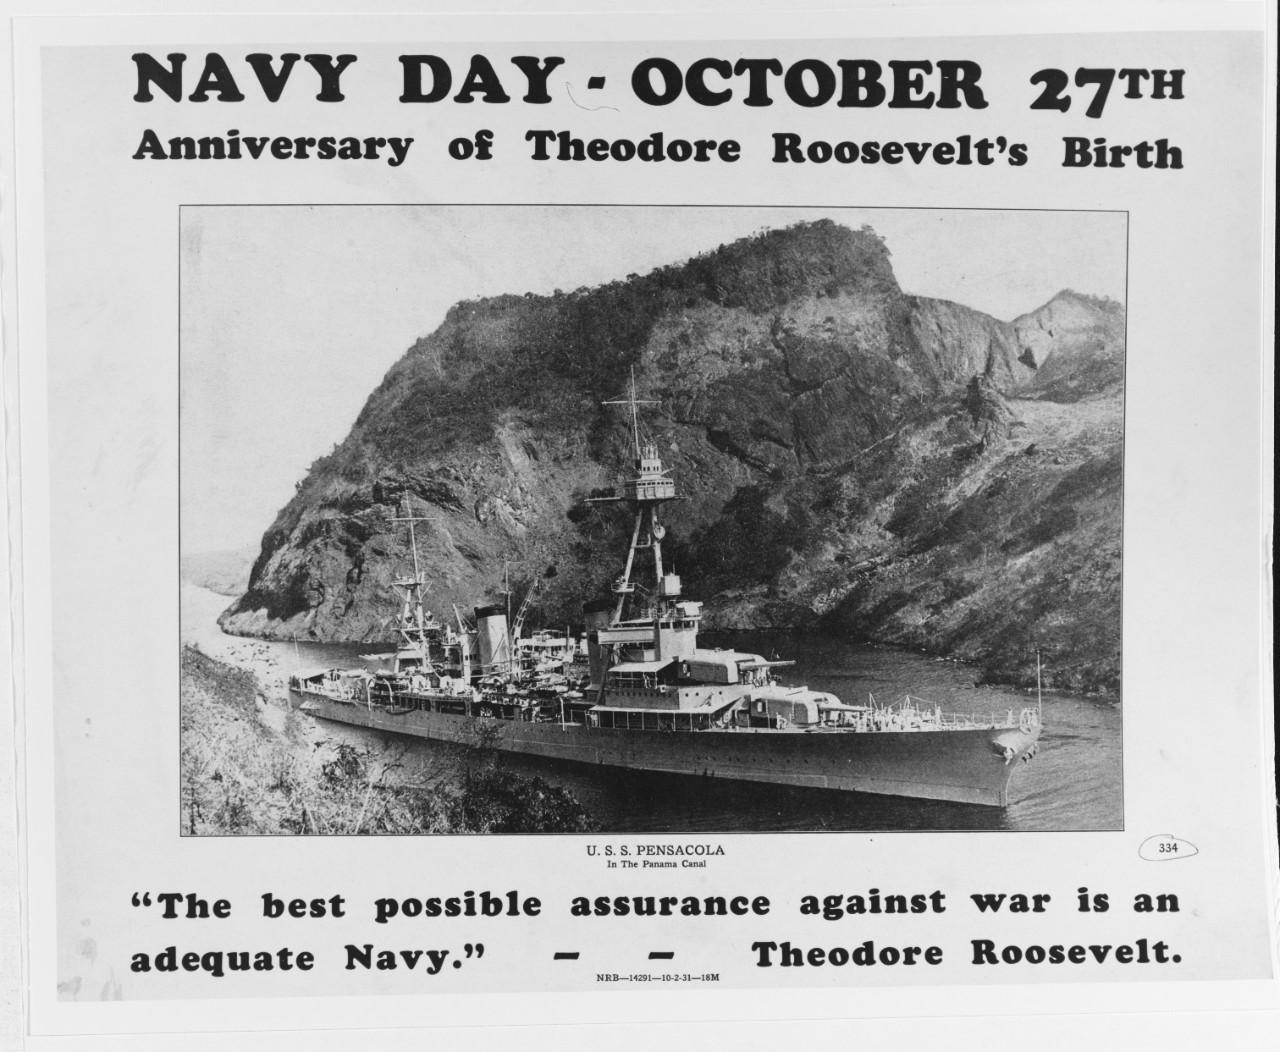 Recruiting poster:  Navy Day - October 27th, Anniversary of Theodore Roosevelt's Birth